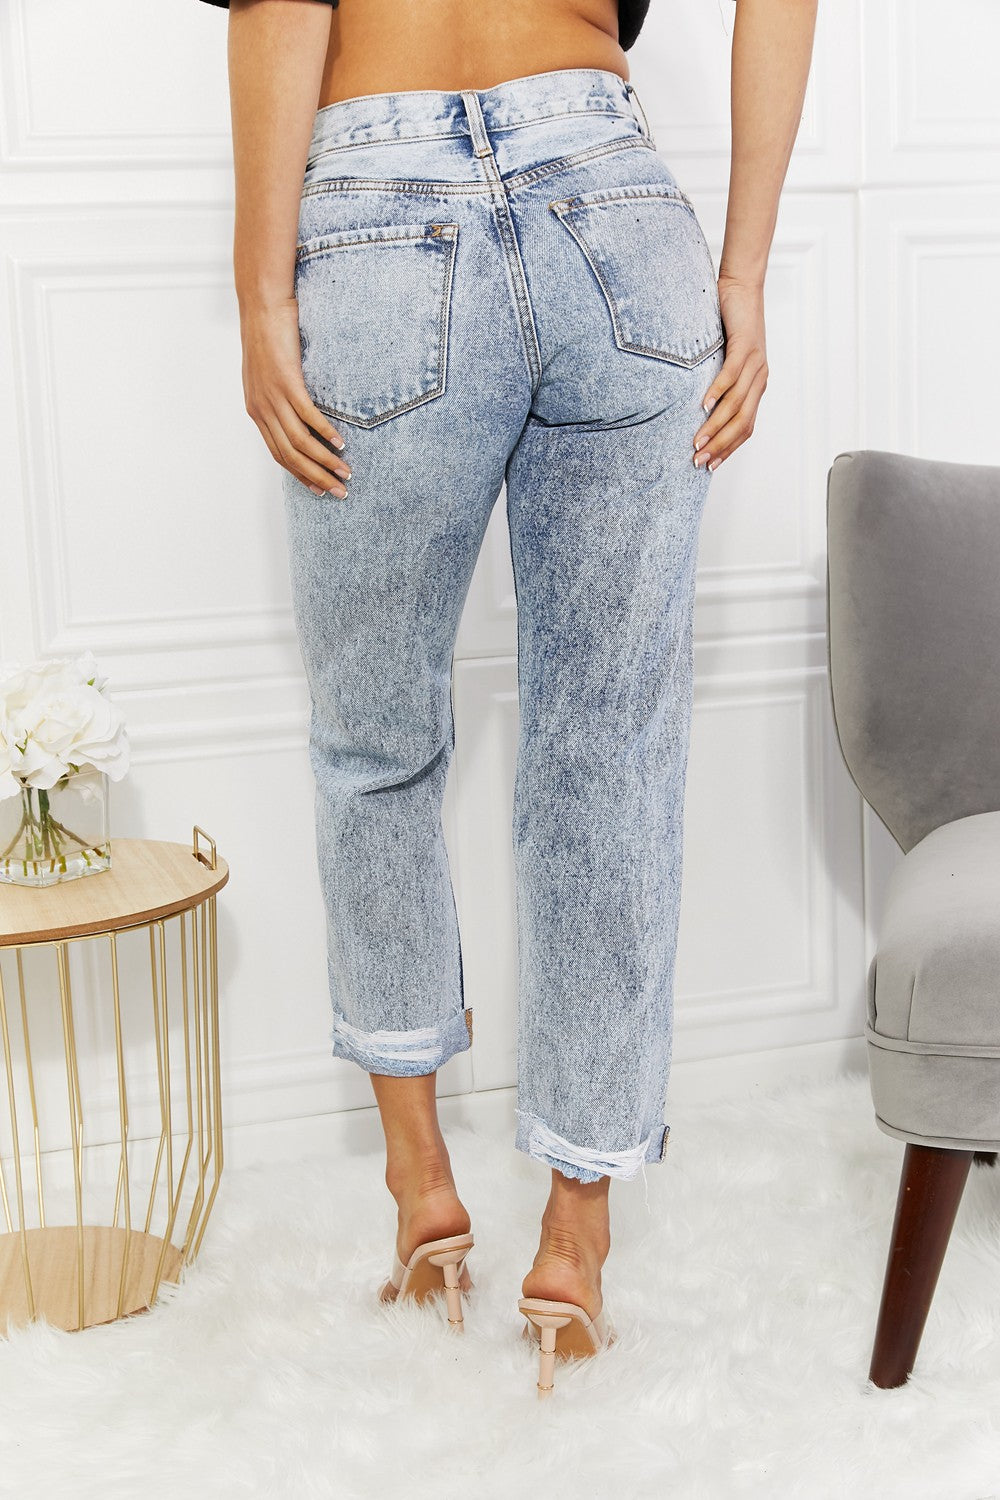 Kancan Kendra High Rise Distressed Straight Jeans - ONLINE ONLY 2-10 DAY SHIPPING